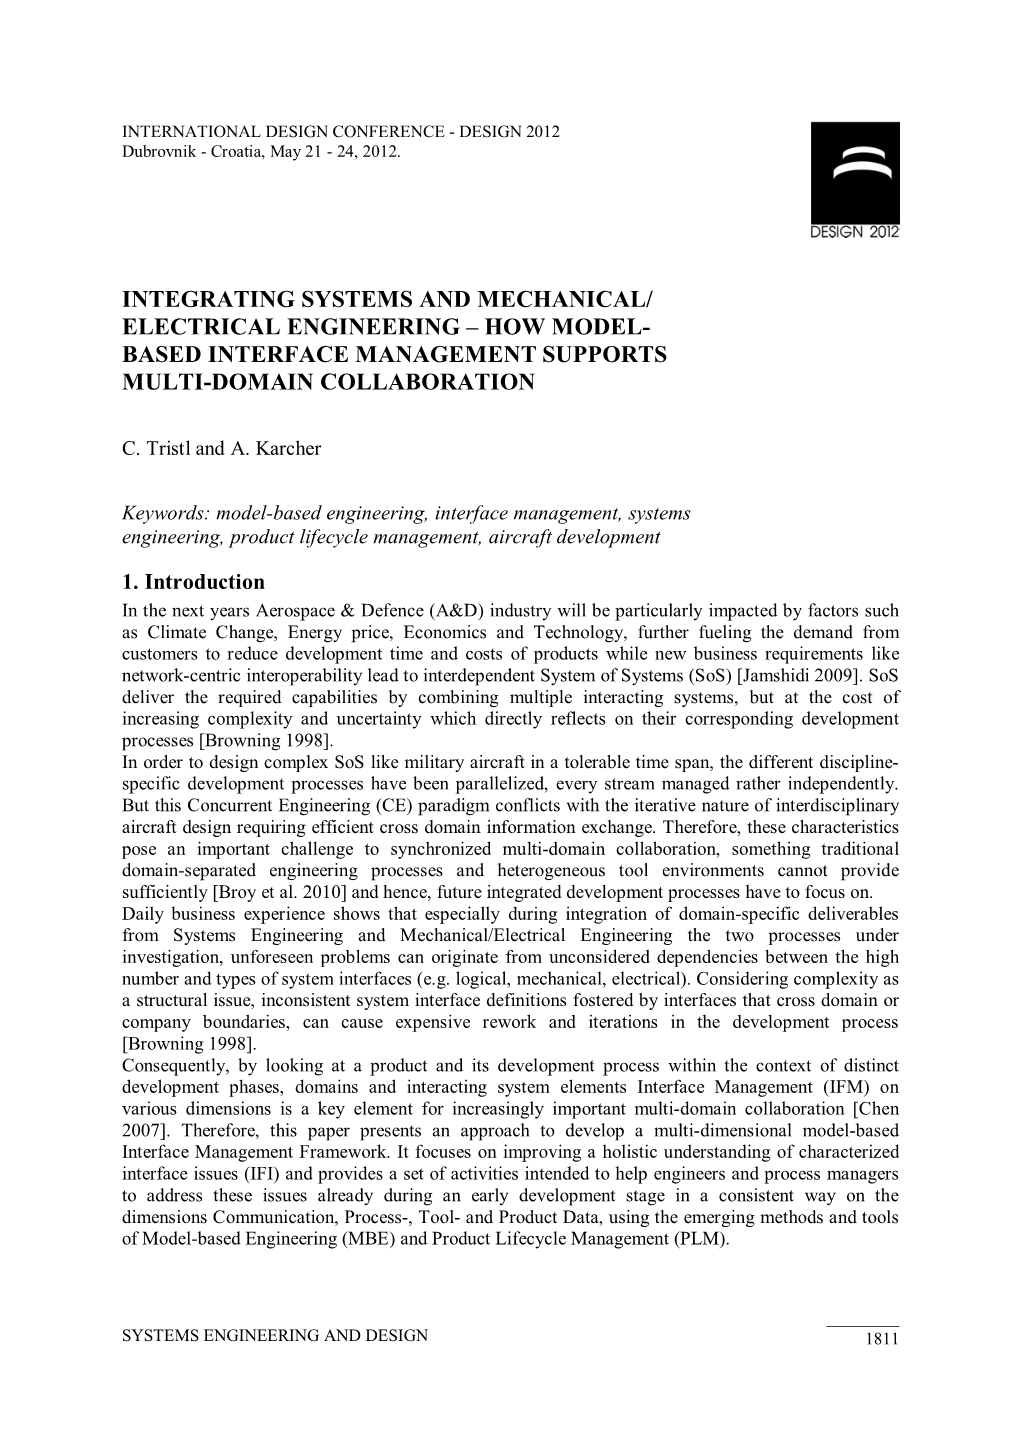 Integrating Systems and Mechanical/ Electrical Engineering – How Model- Based Interface Management Supports Multi-Domain Collaboration